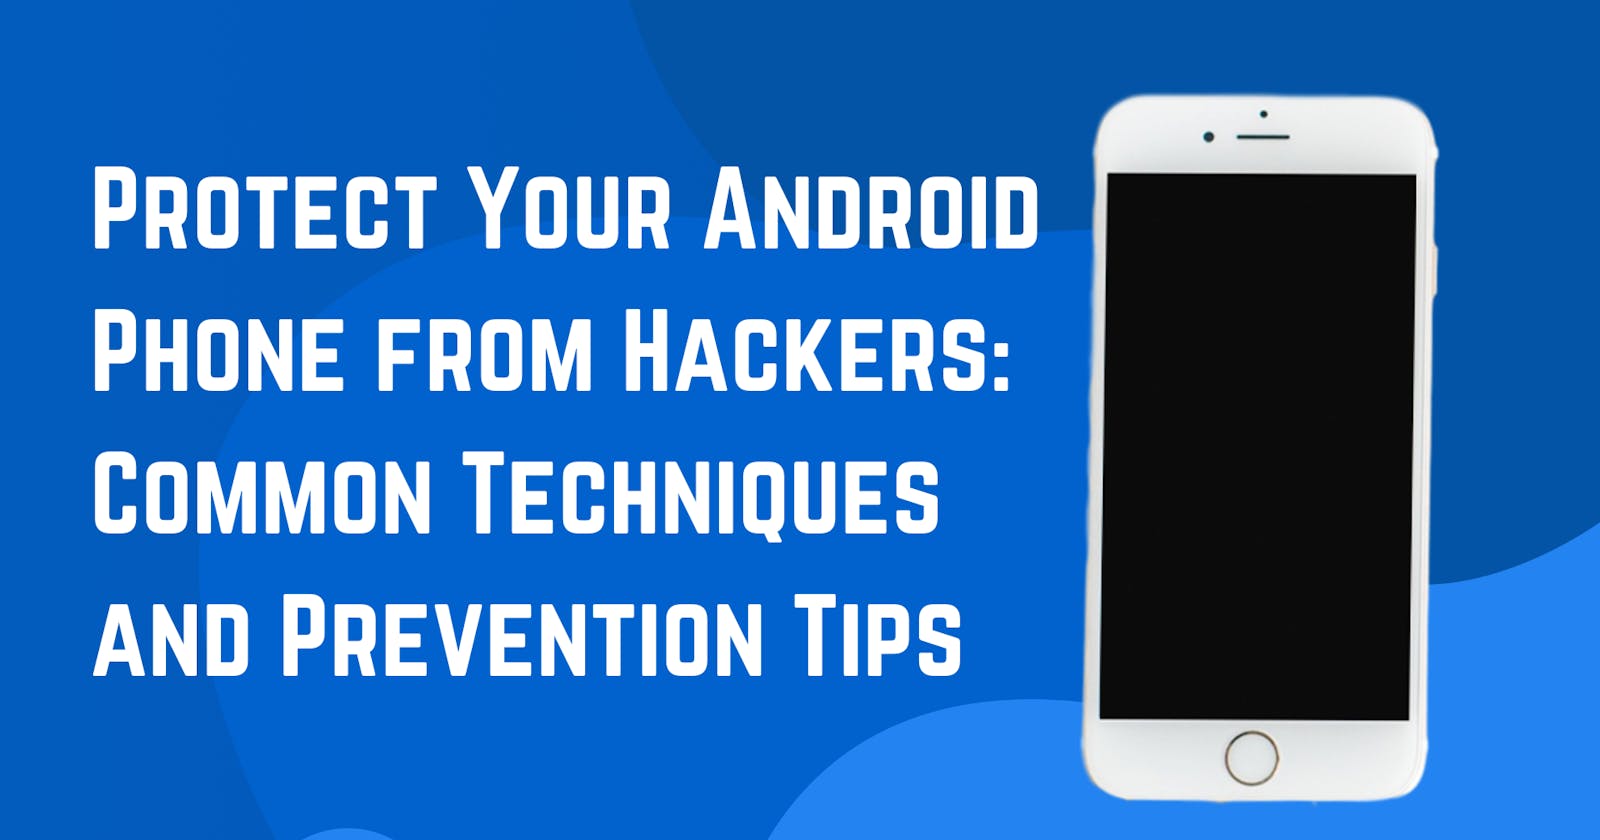 Protect Your Android Phone from Hackers: Common Techniques and Prevention Tips